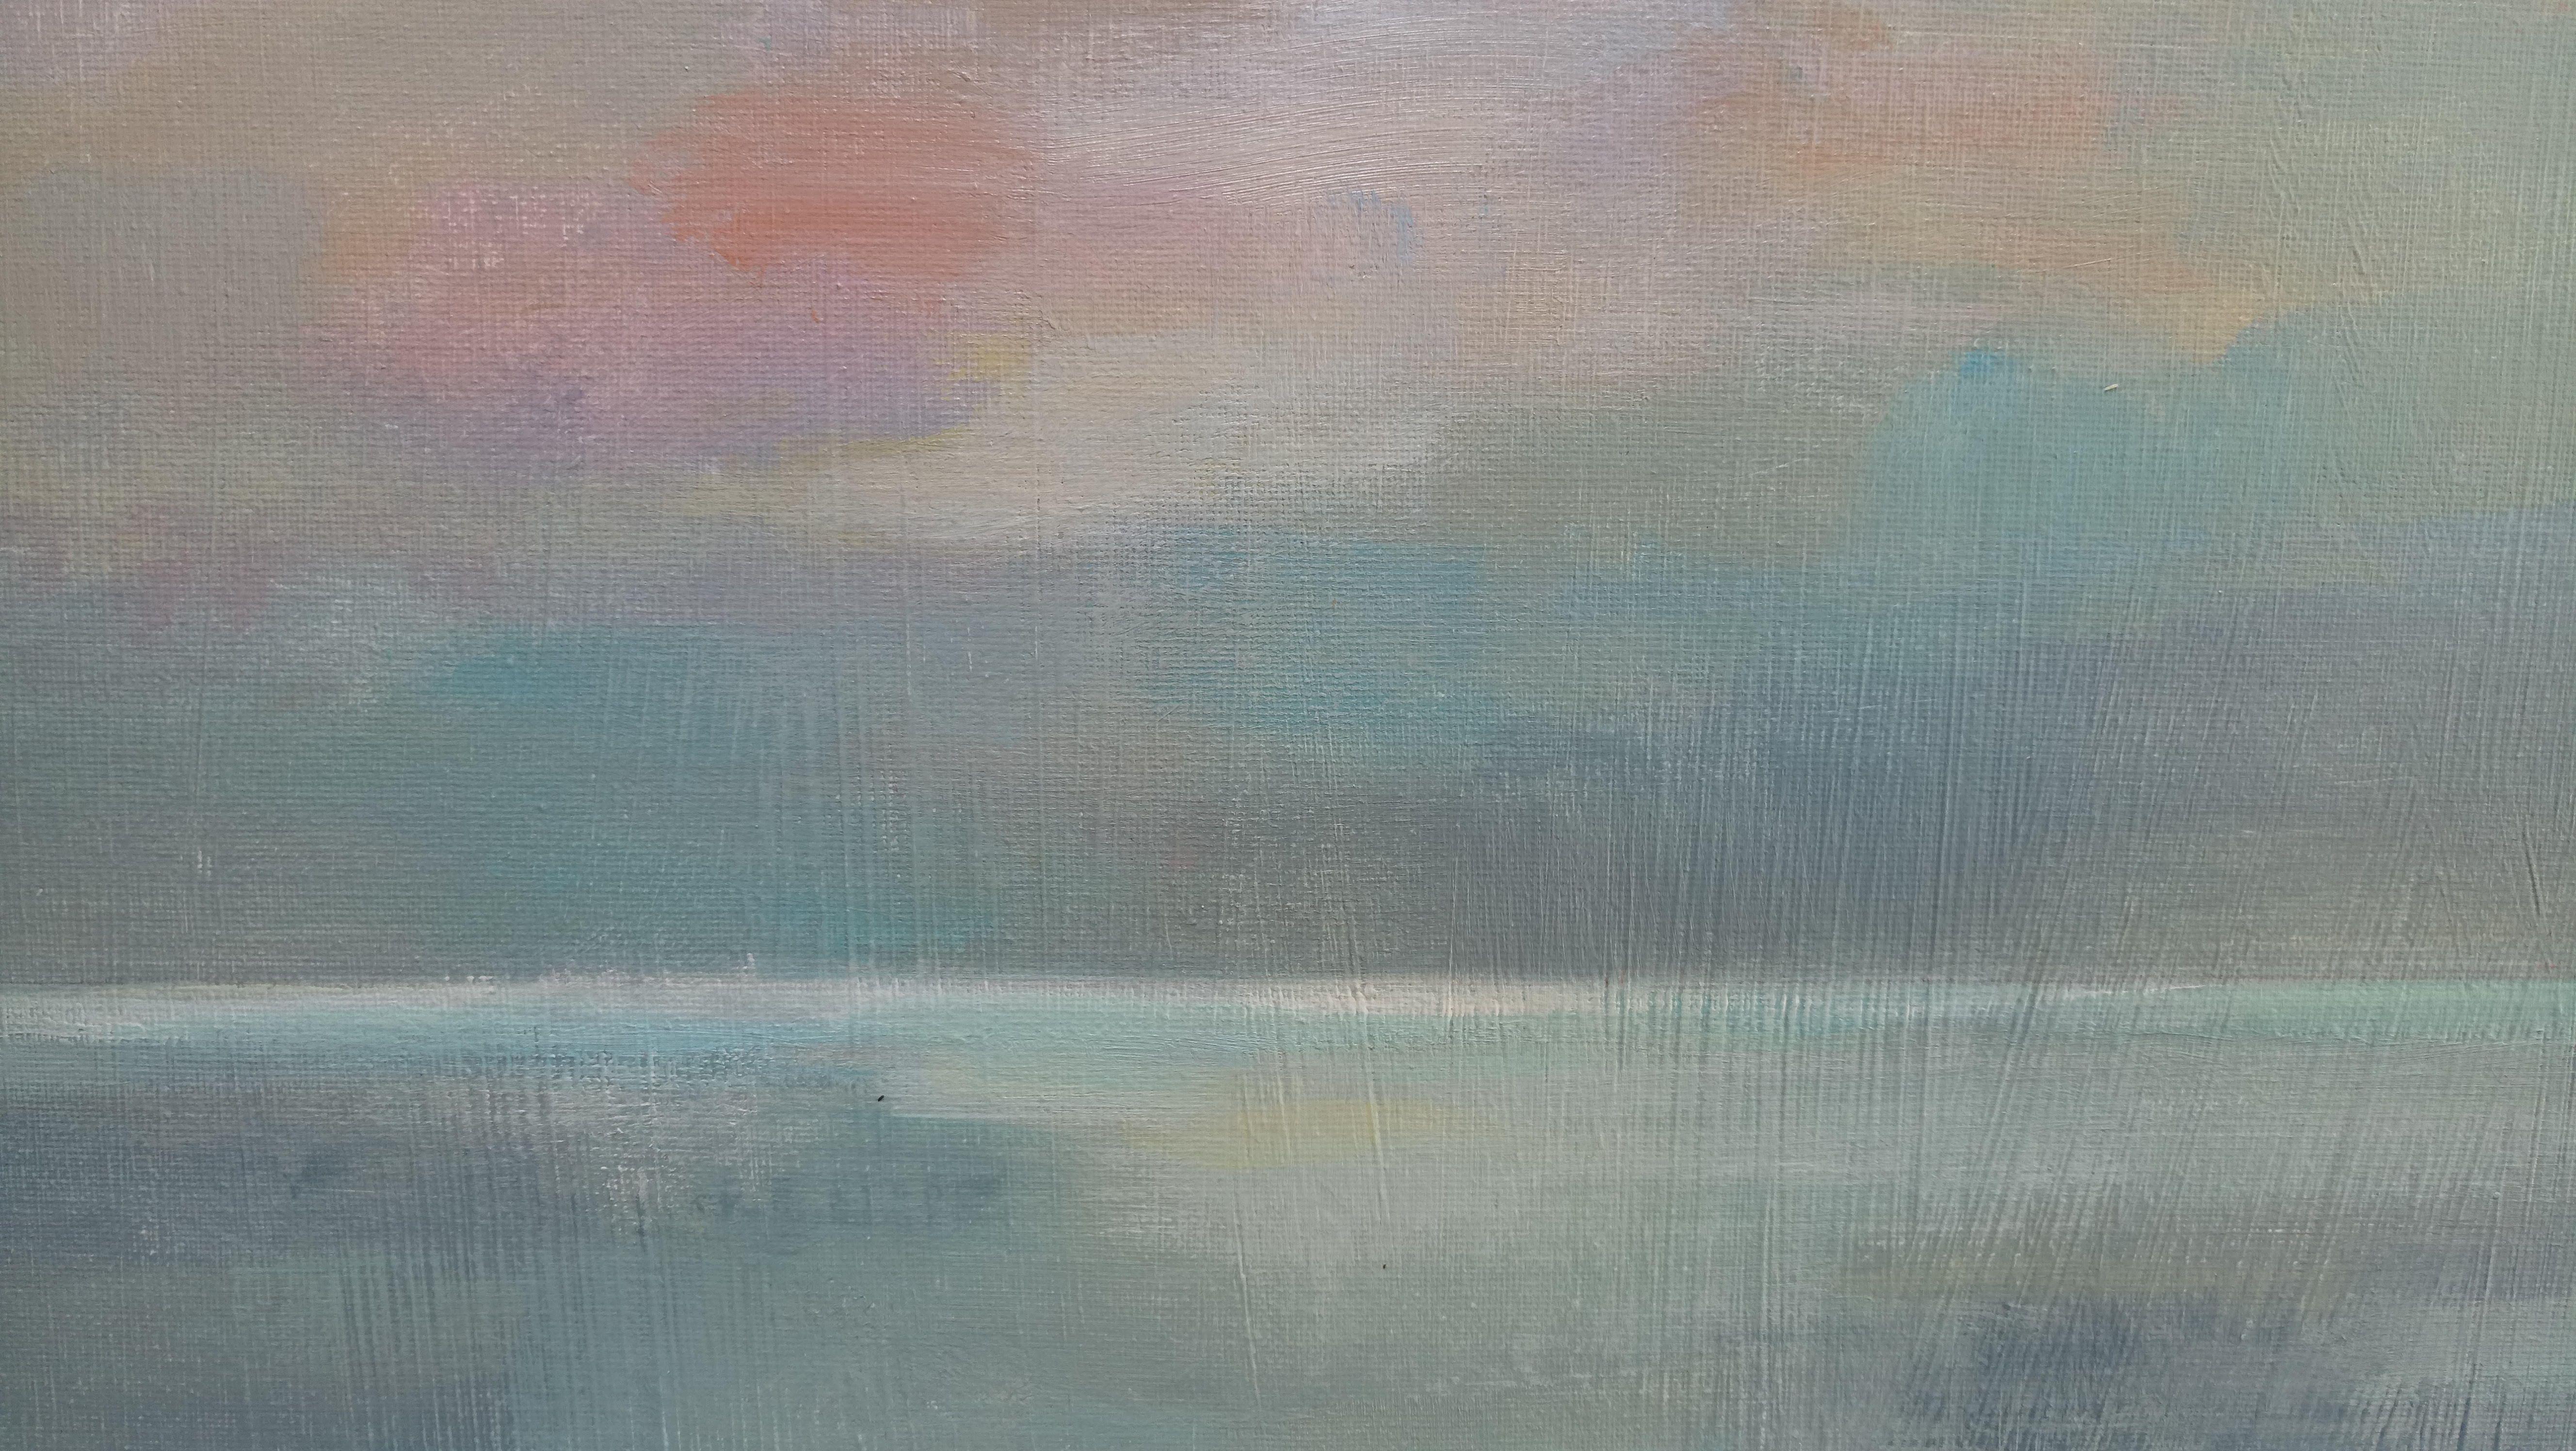 This is a large seascape painted on a richly textured canvas with soft pastel-colors blue palette. Touches of pink and pale yellow express the first rays of light, reflected on the water. The pale line of the horizon is barely dividing the sea from